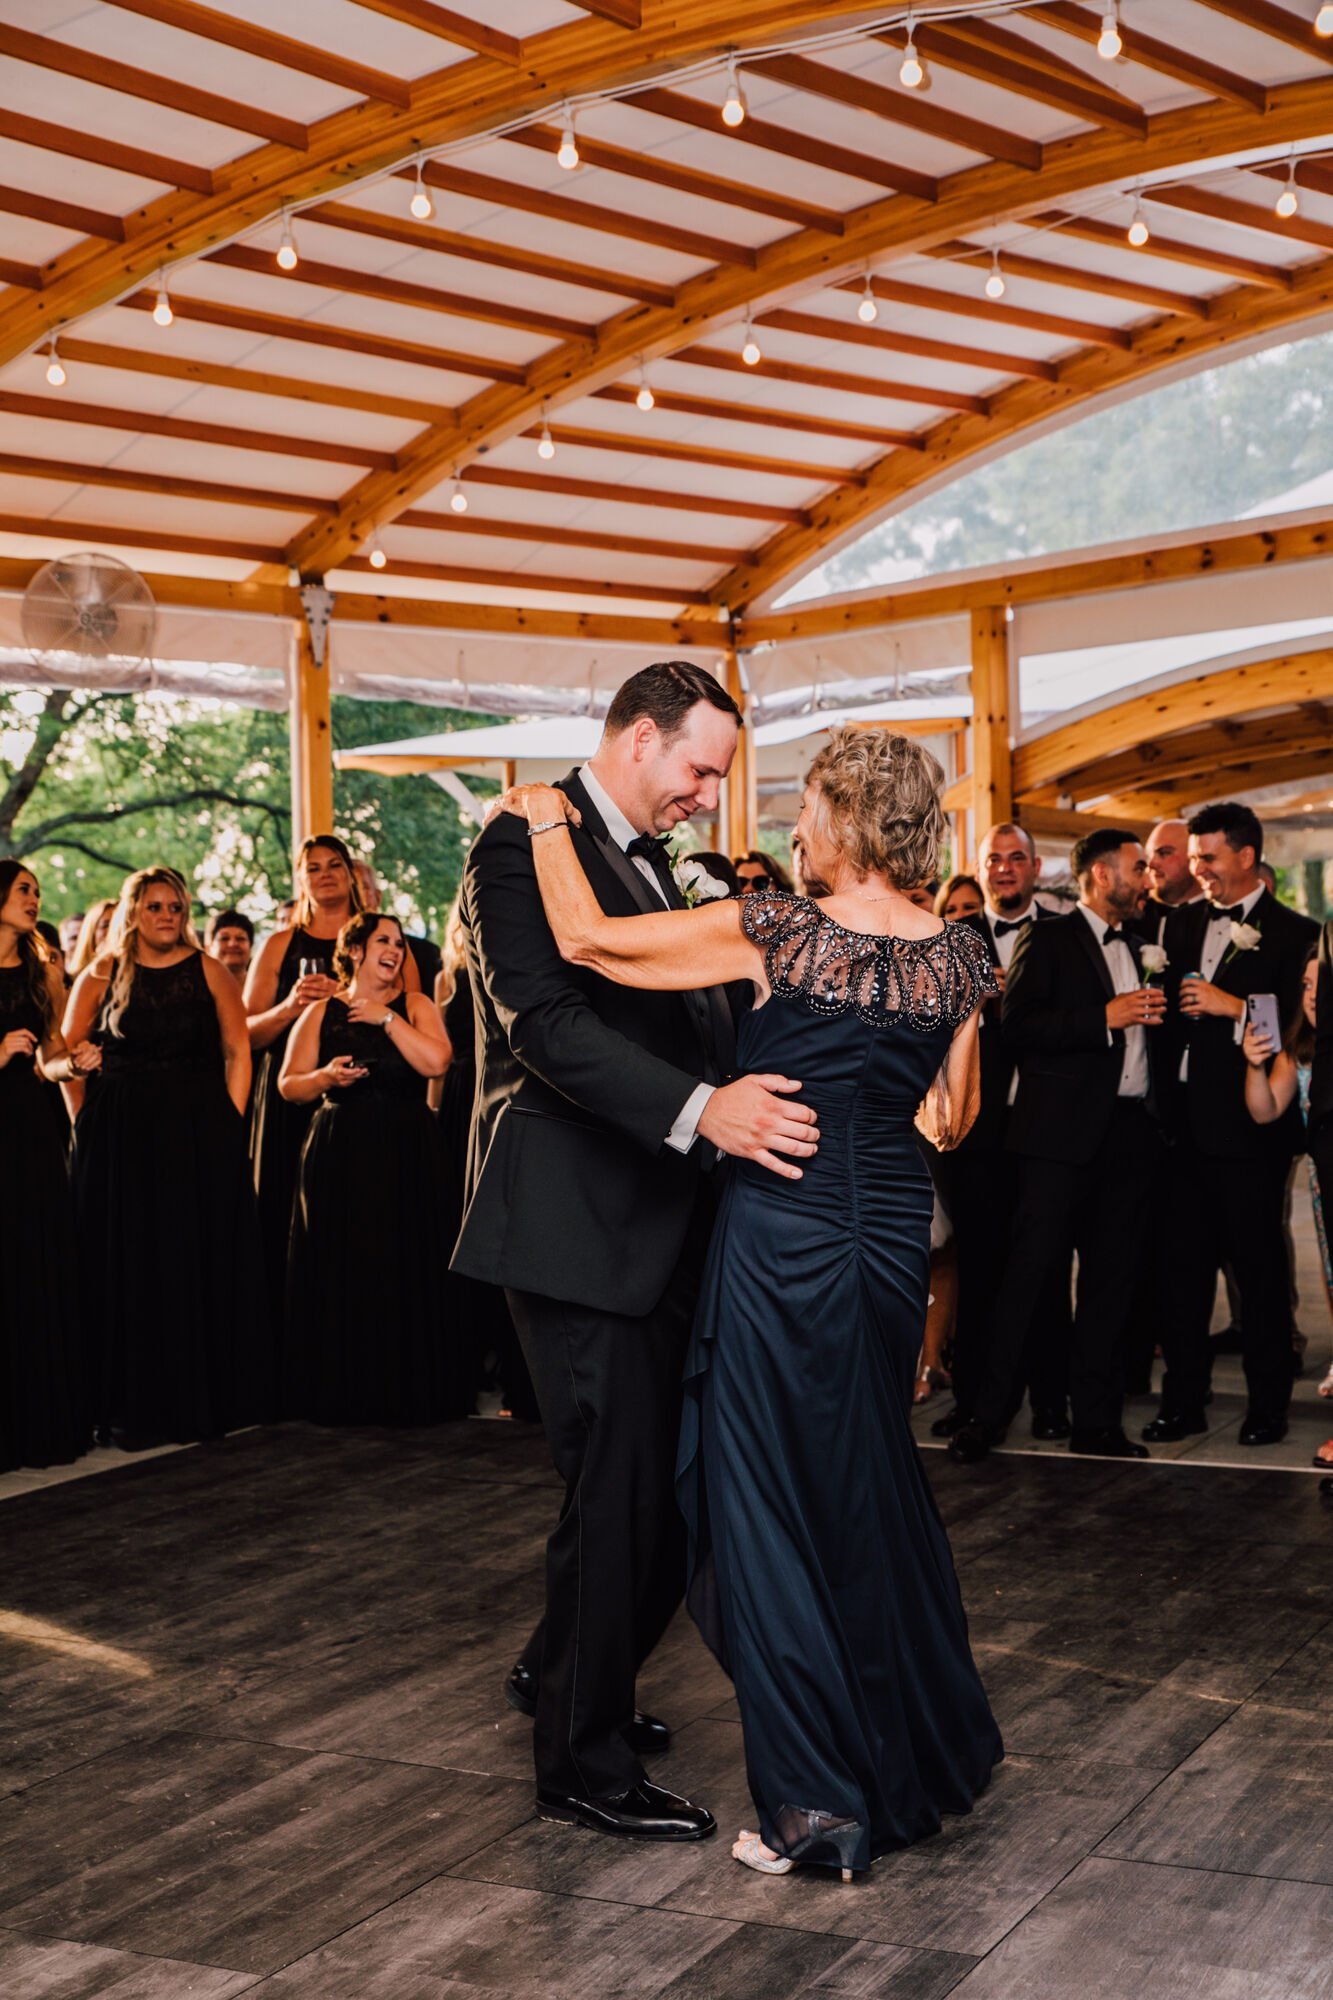  Mother son dance from a cayuga lake wedding 